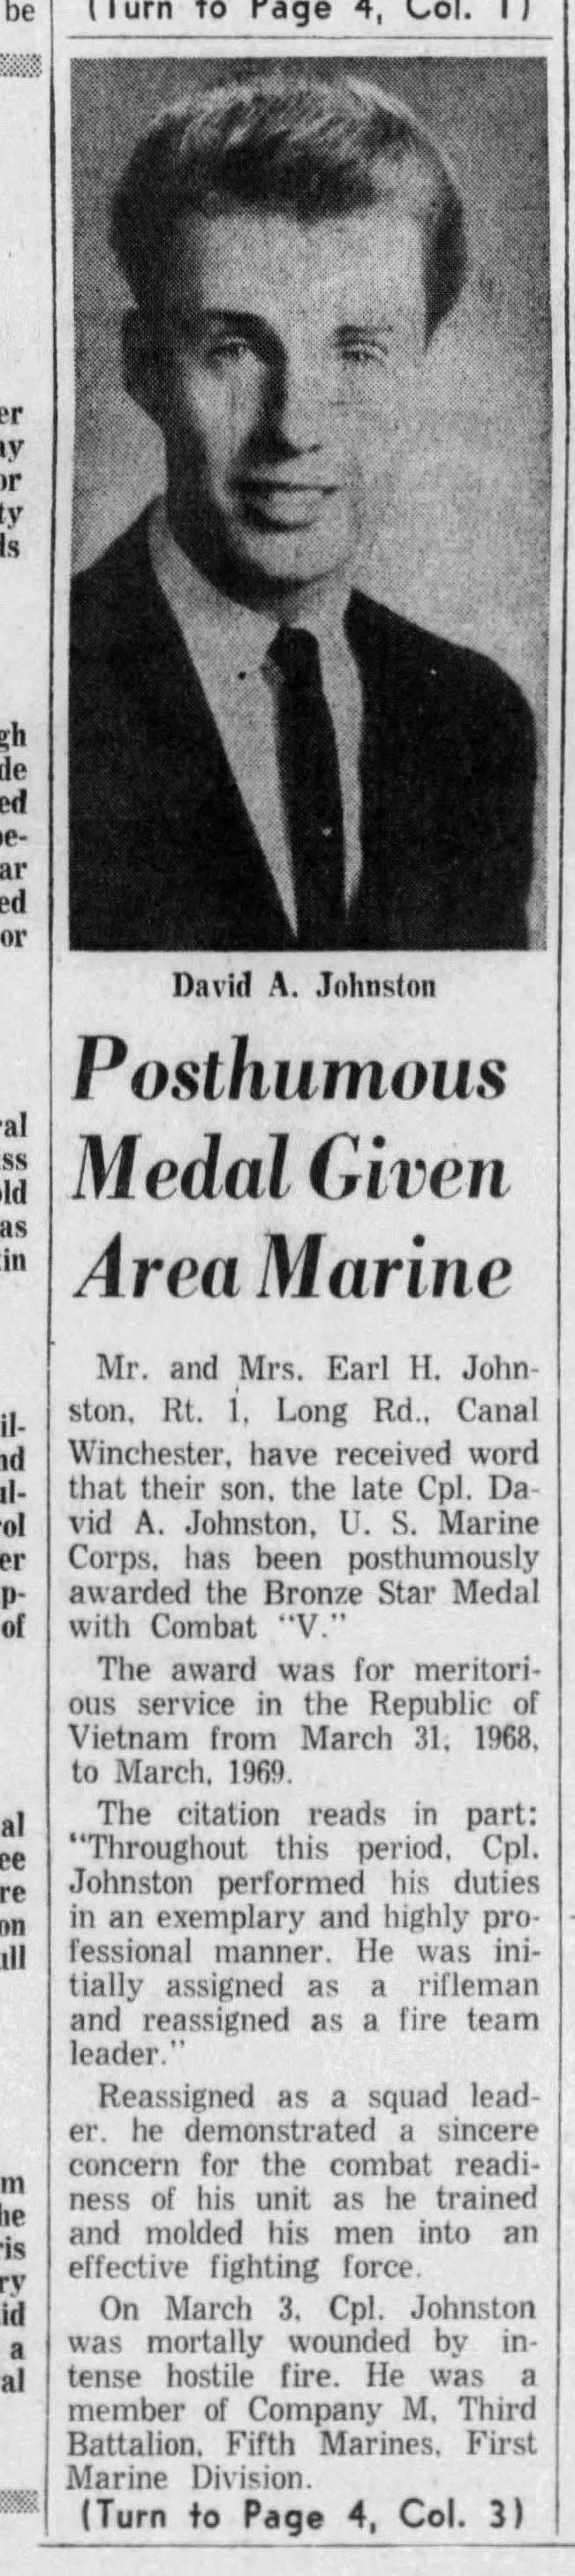 A clipping from the Oct. 16, 1969 Lancaster Eagle-Gazette.